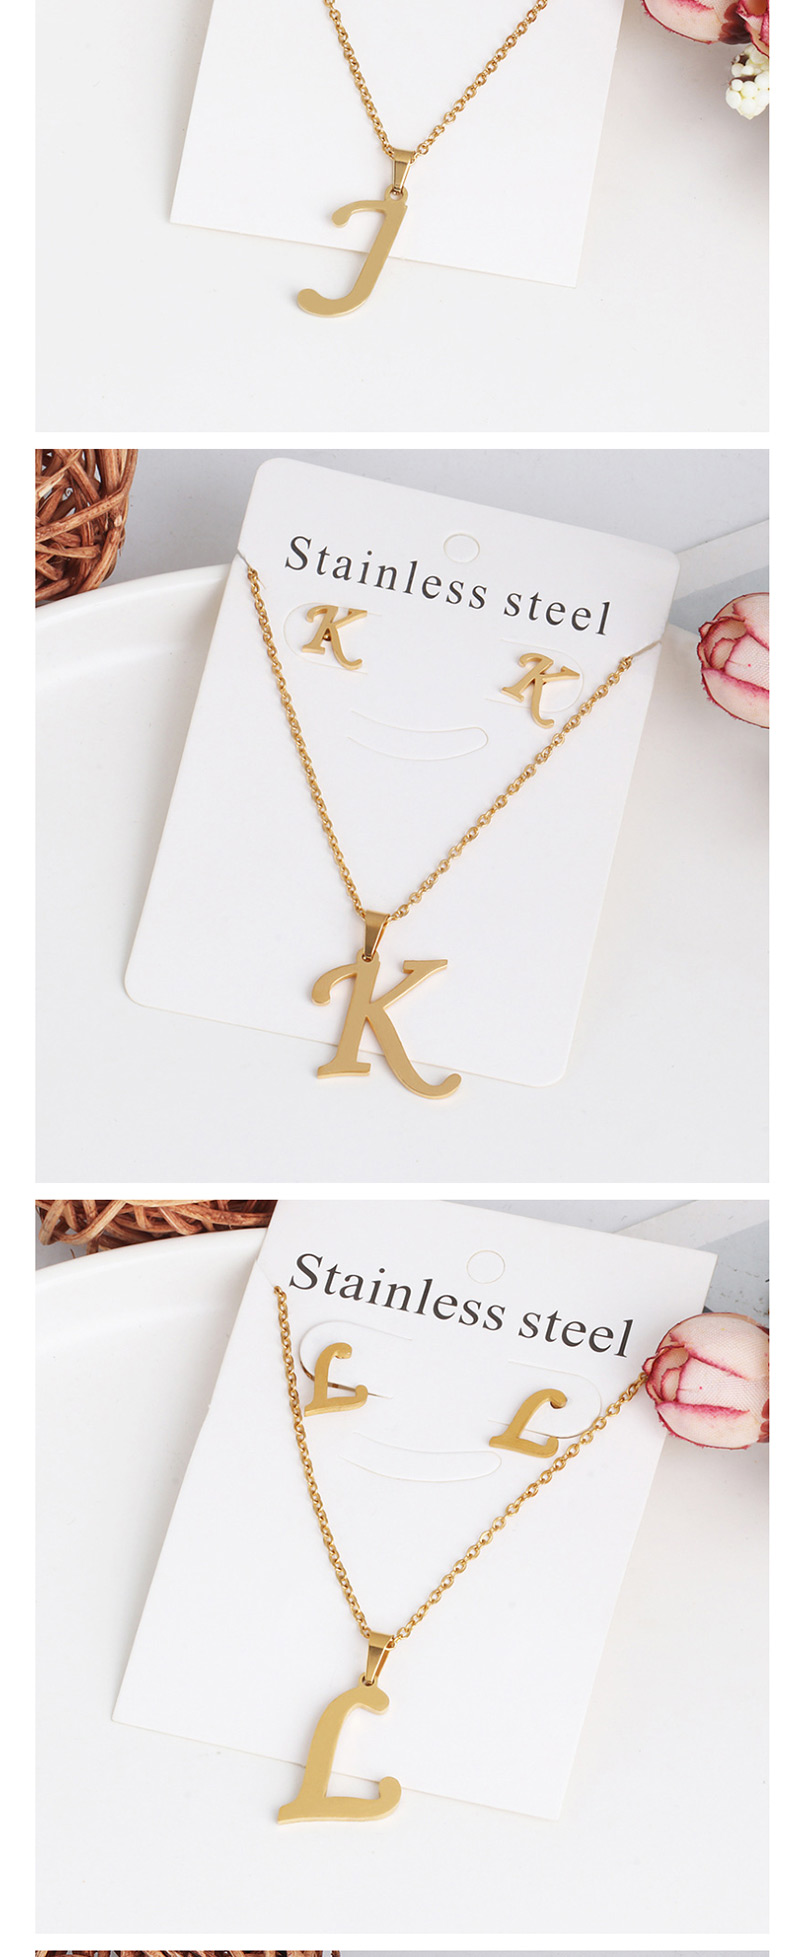 Fashion Z Gold Stainless Steel Letter Necklace Earrings Two-piece,Jewelry Sets